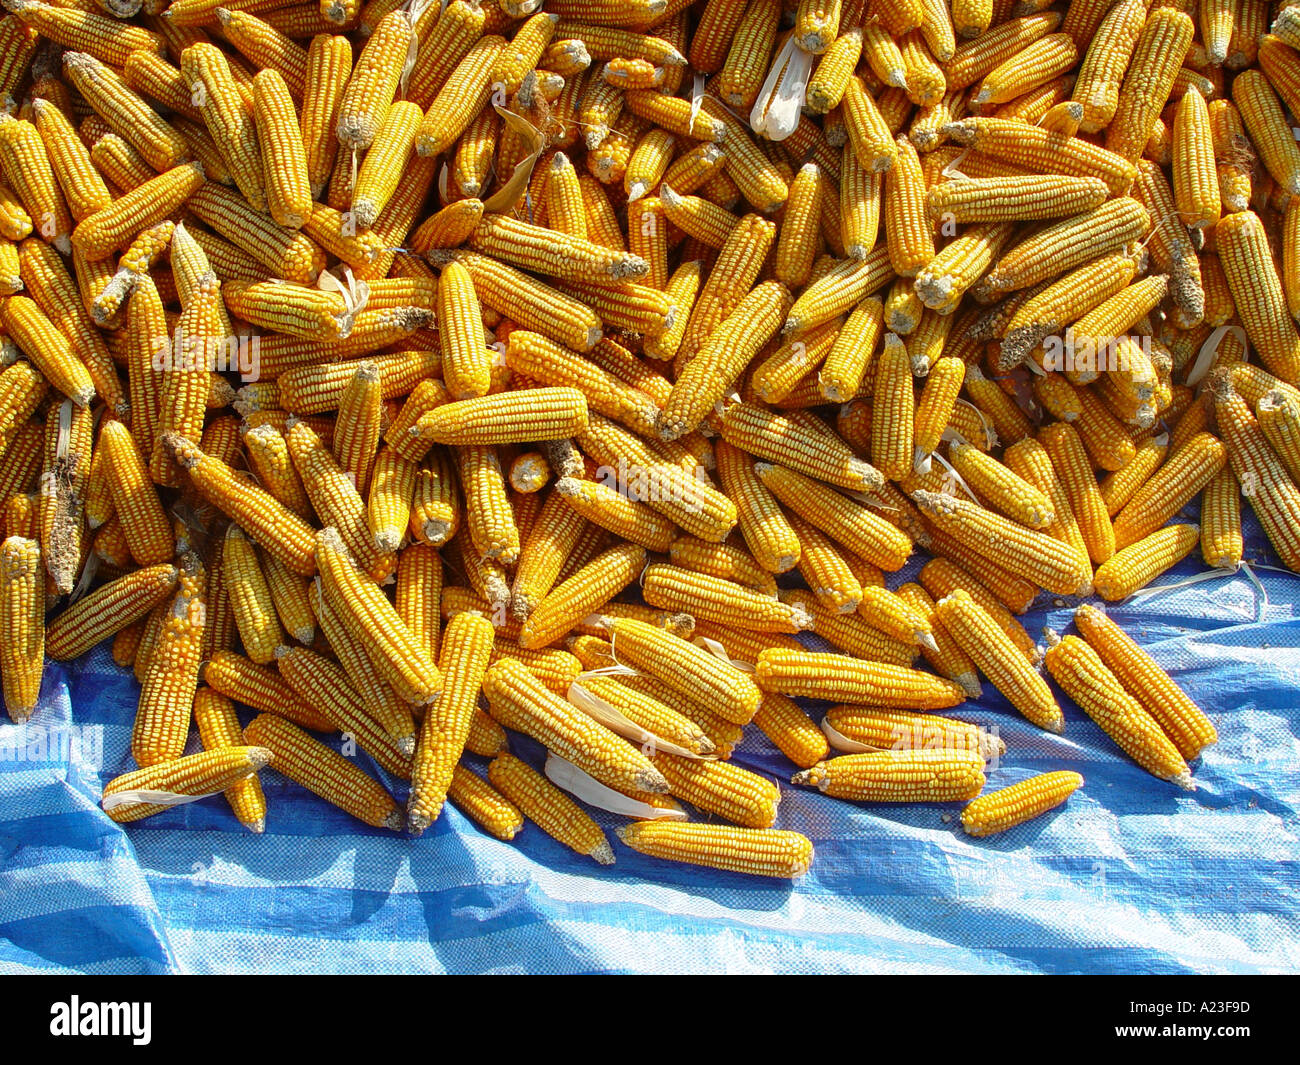 Corncobs on blue plastic sheet for fodder in Thailand Stock Photo